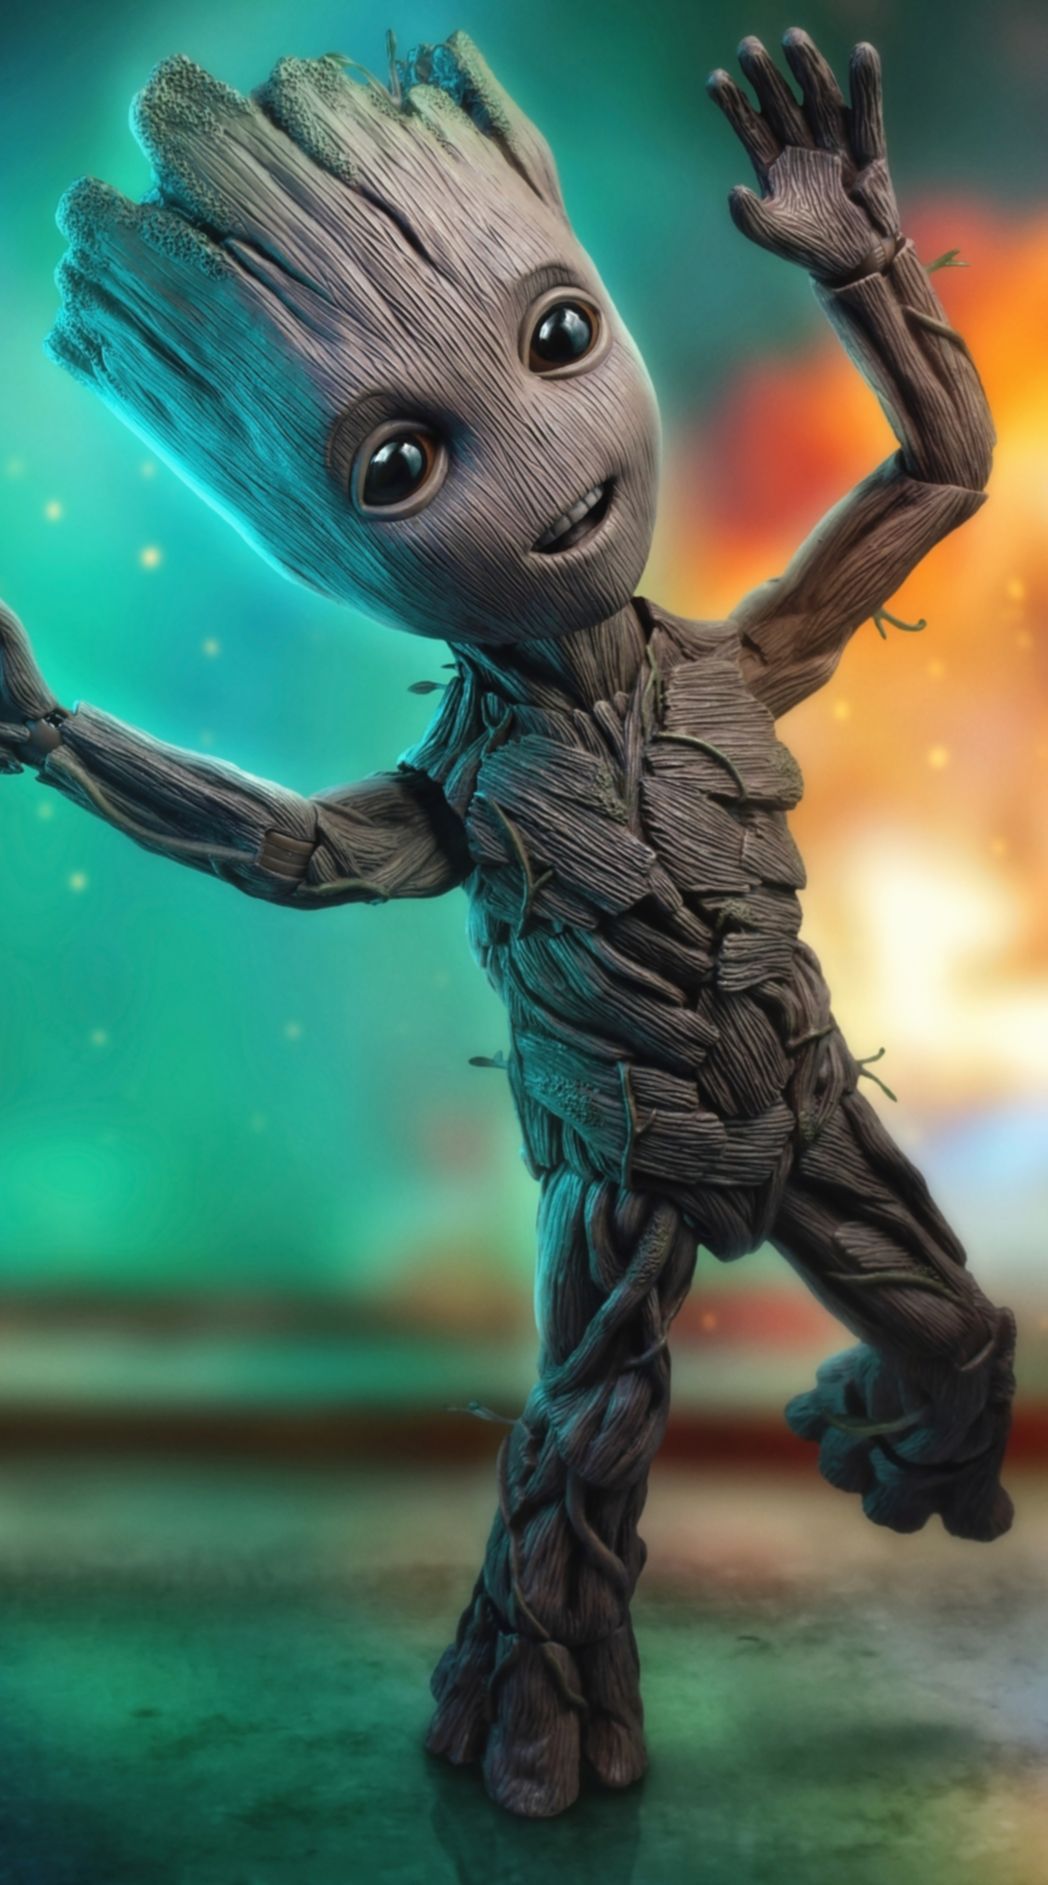 Groot Avengers Mobile Wallpapers - Wallpaper Cave